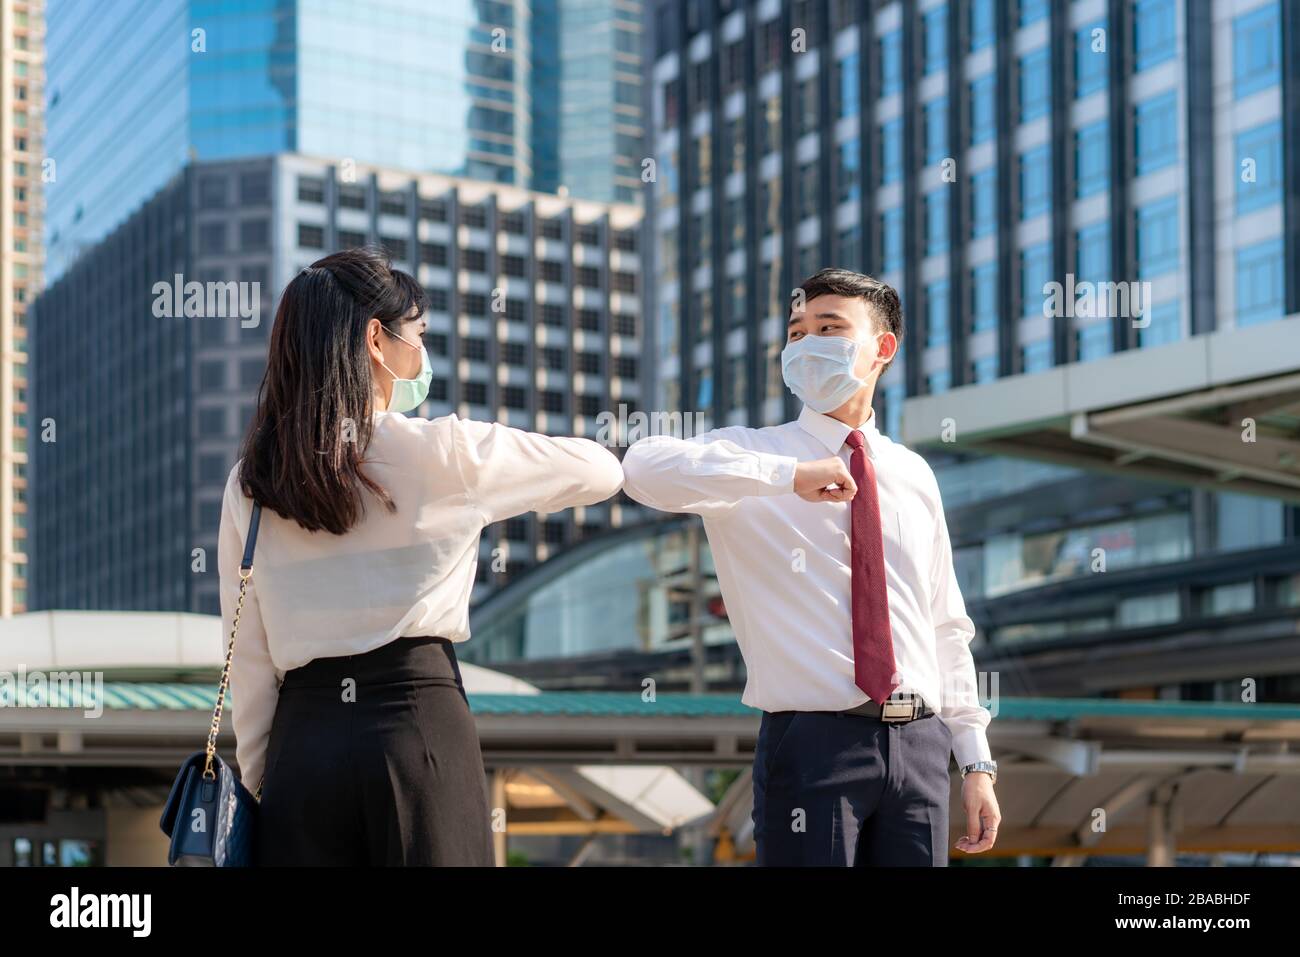 Elbow bump is new novel greeting to avoid the spread of coronavirus. Two Asian business friends meet in front of office building. Instead of greeting Stock Photo